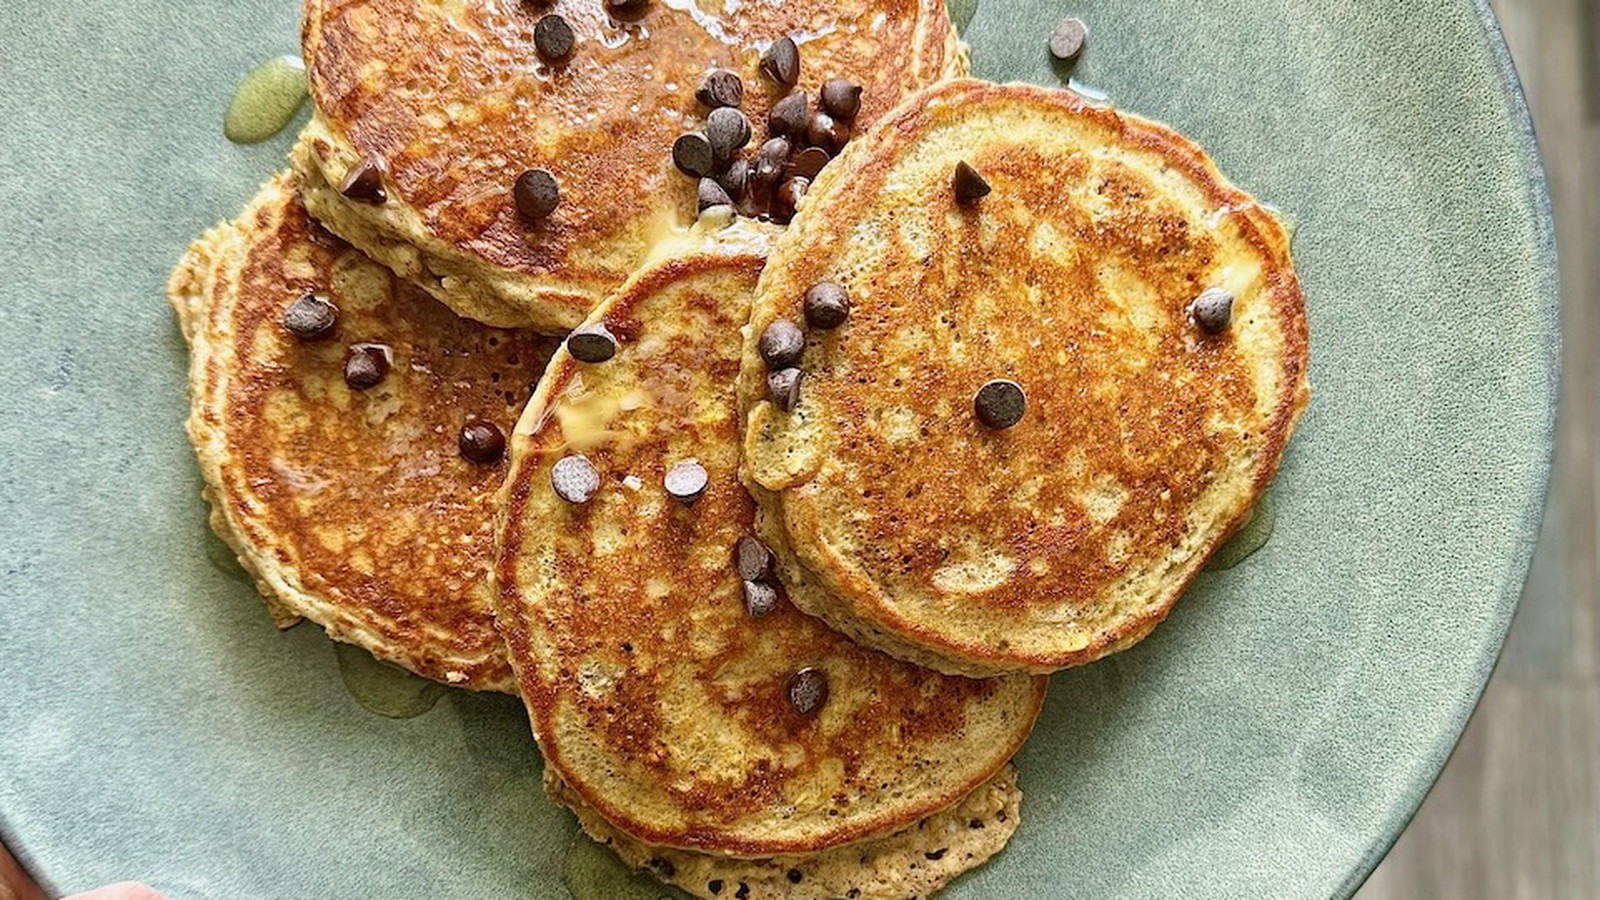 Image of Fluffy and Delicious Chocolate Chip Protein Pancakes Recipe – Ready in Minutes!